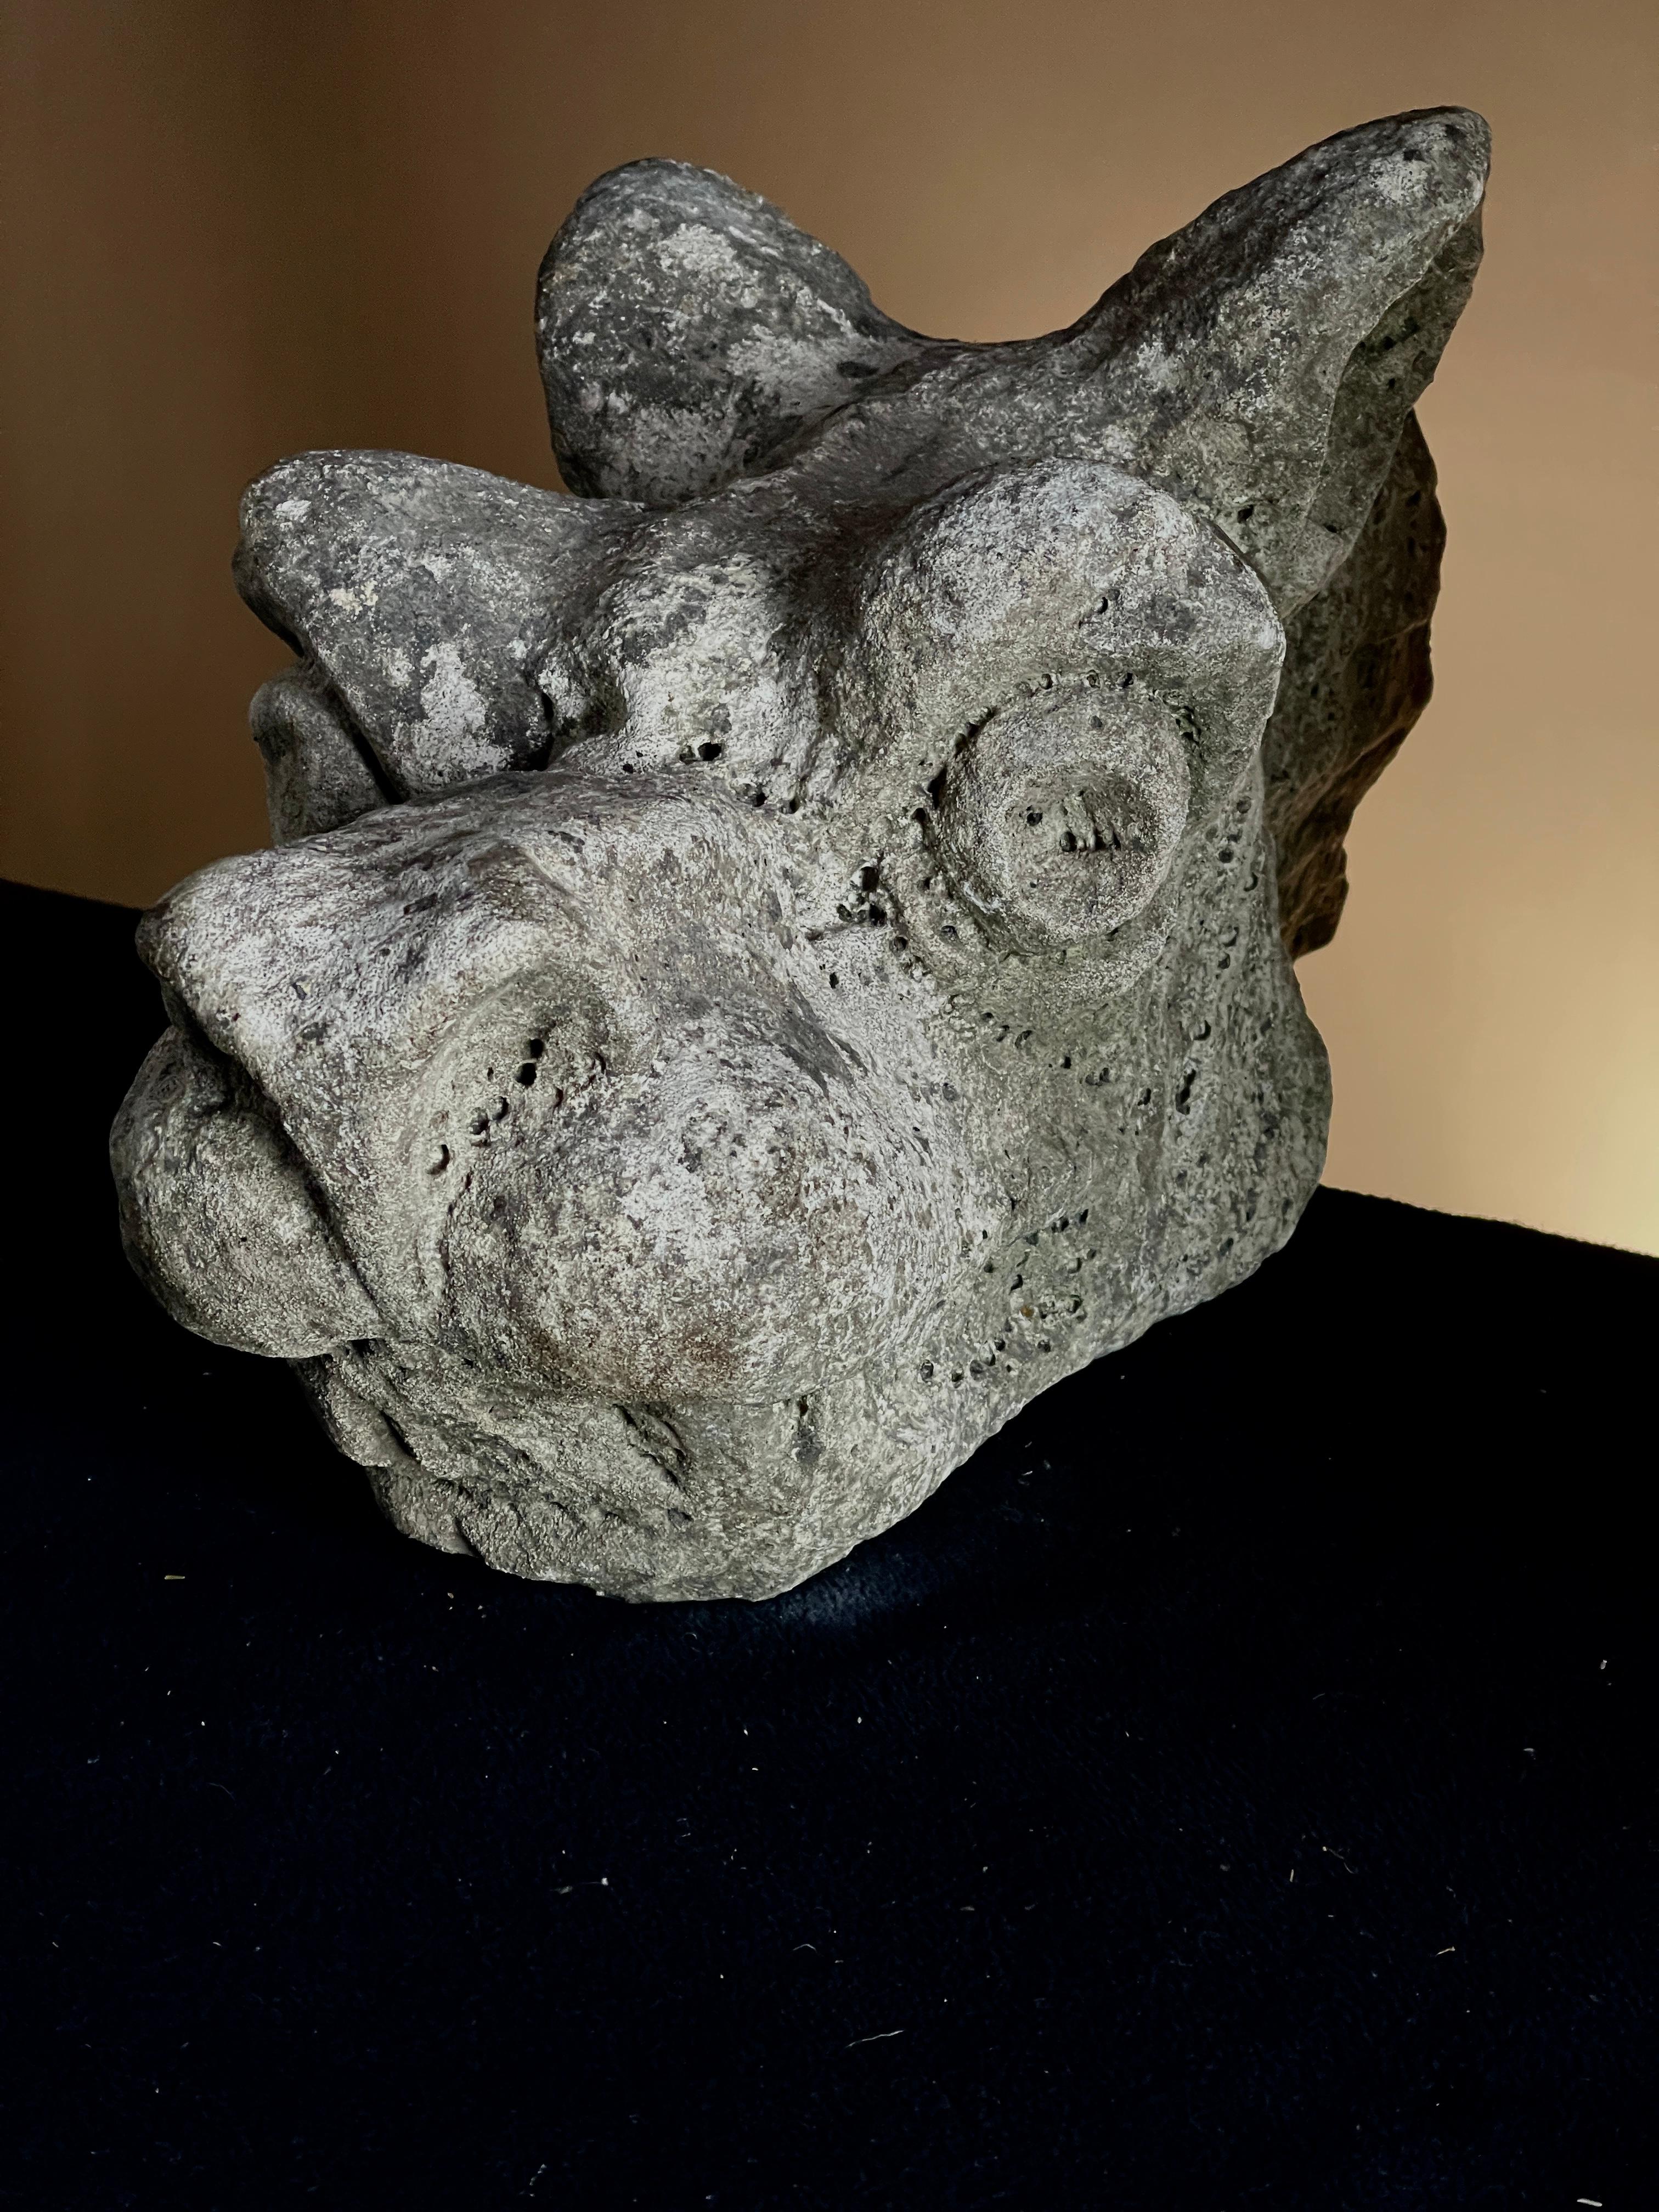 A Stone grotesque carving c1400

Size 40cms long 22 cms high and 21 cms wide